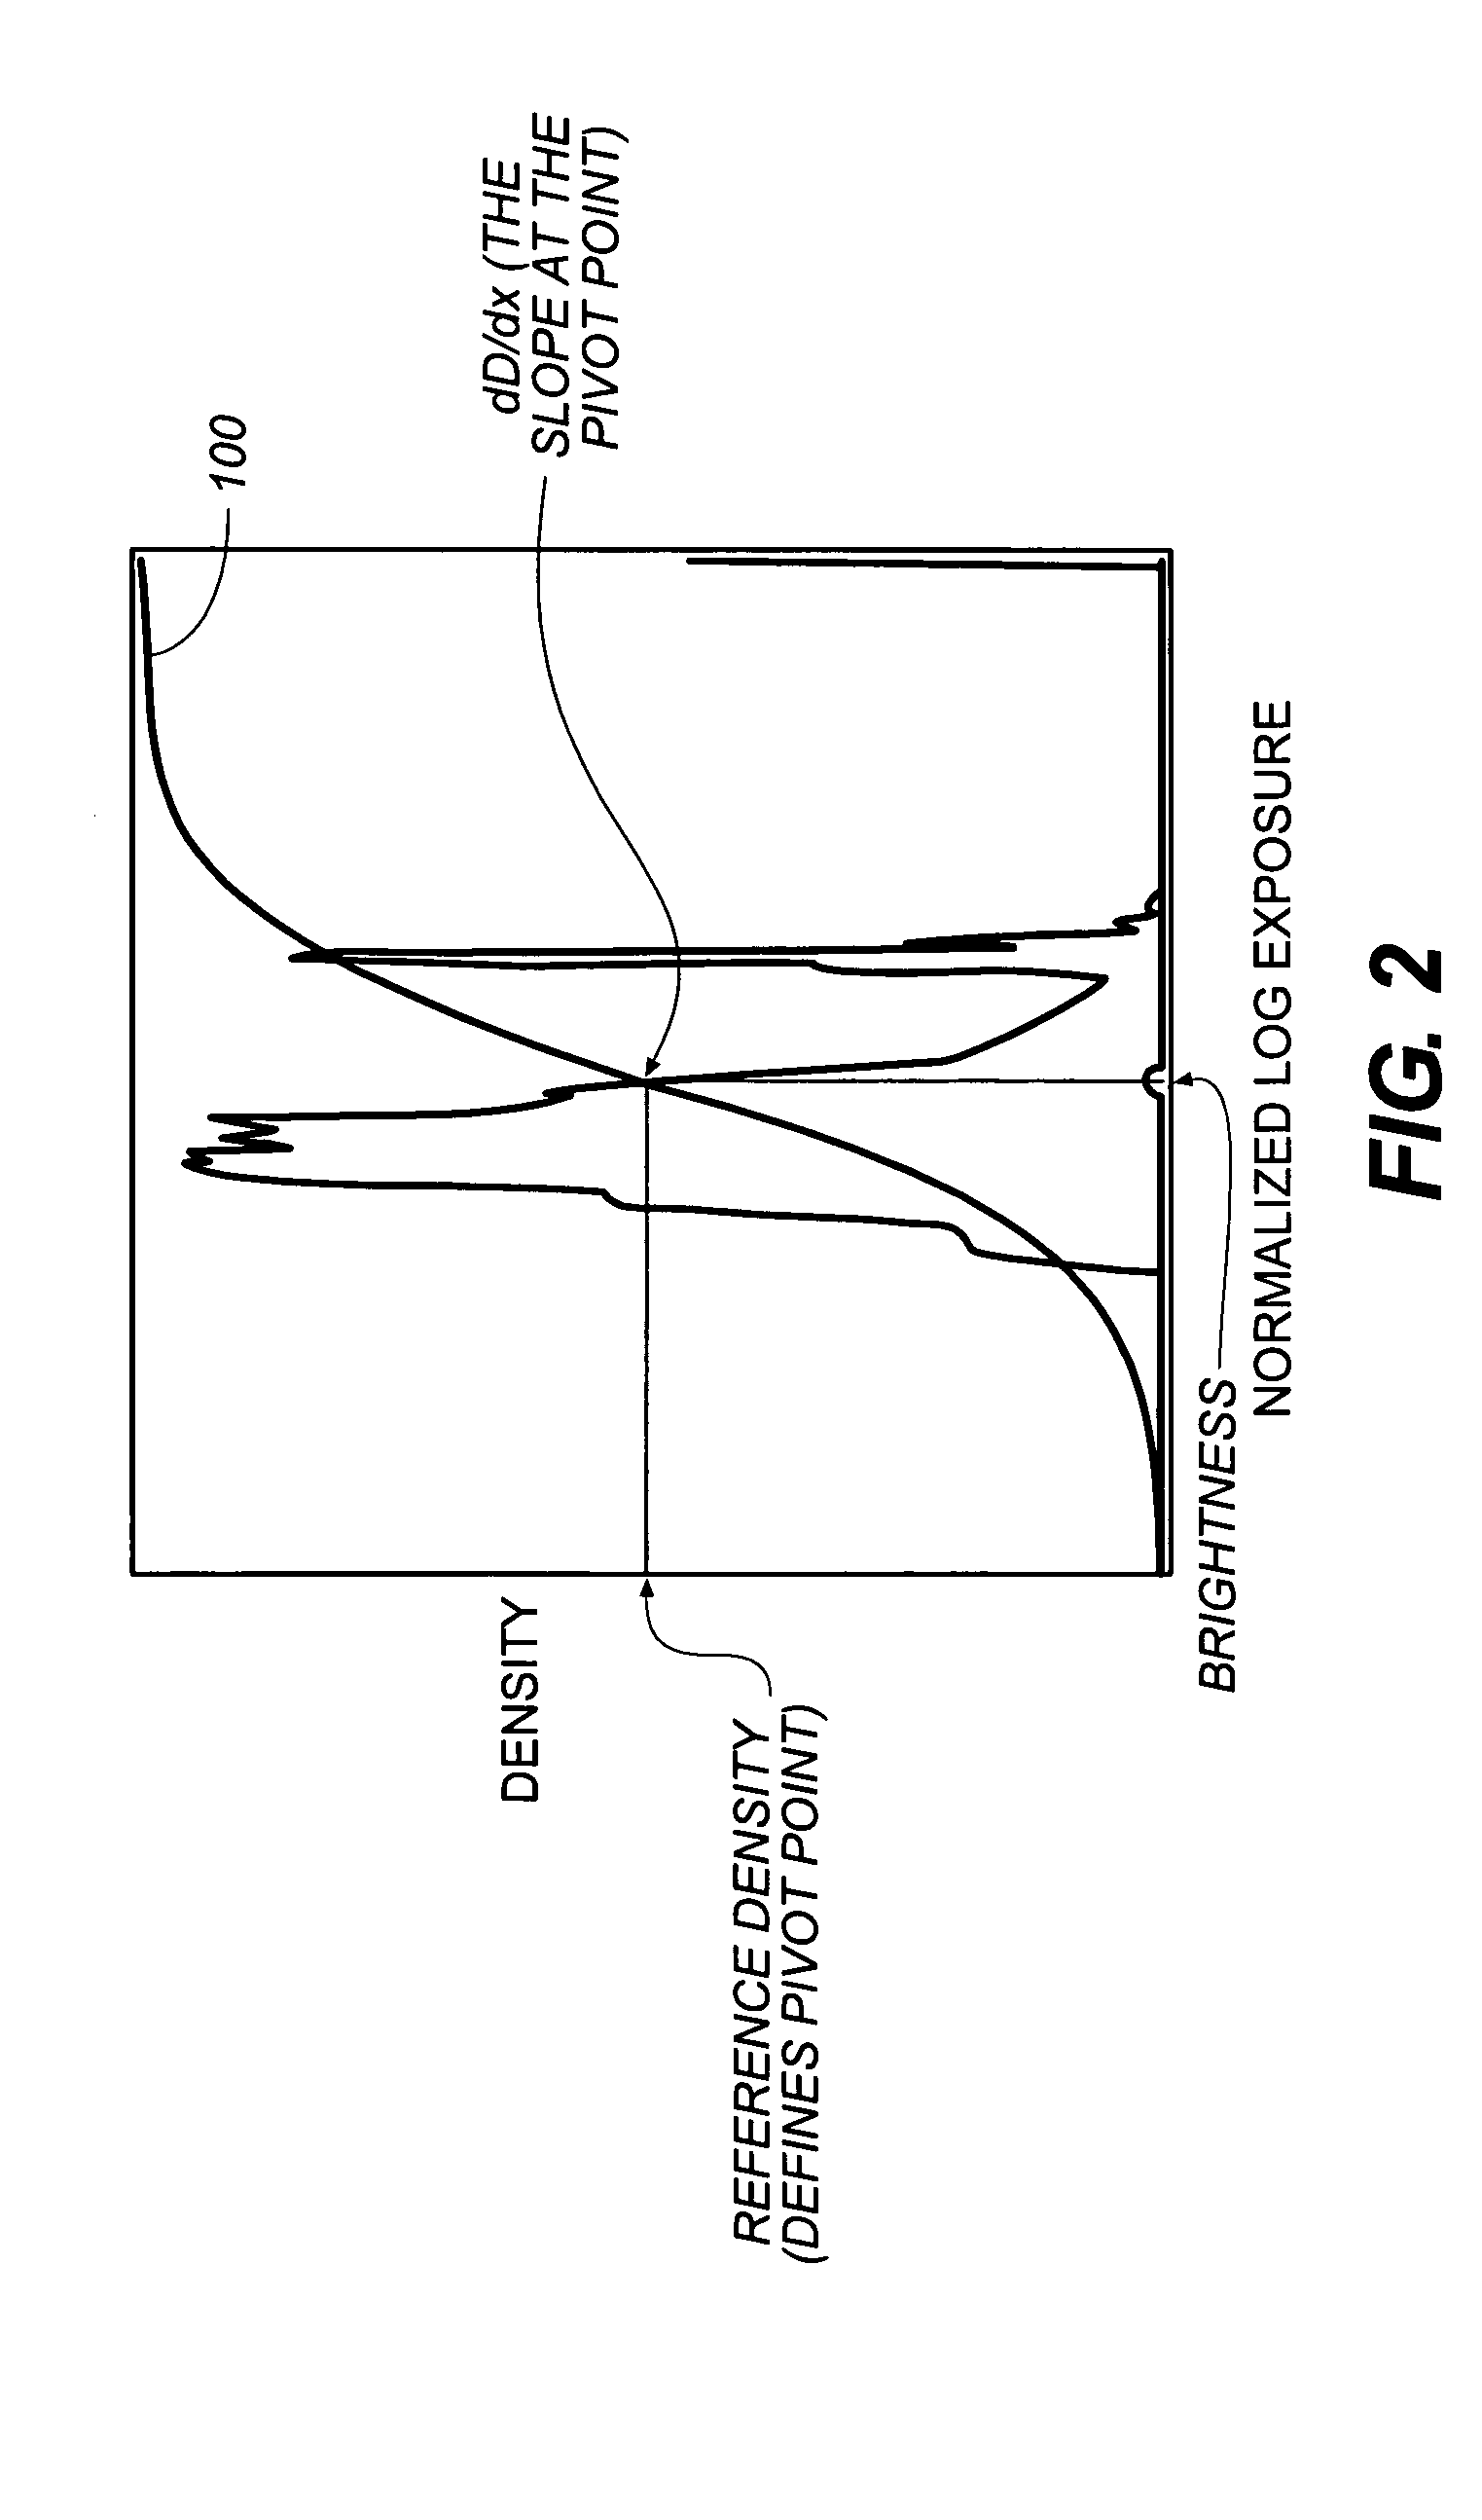 Method for rendering digital radiographic images for display based on independent control of fundamental image quality parameters